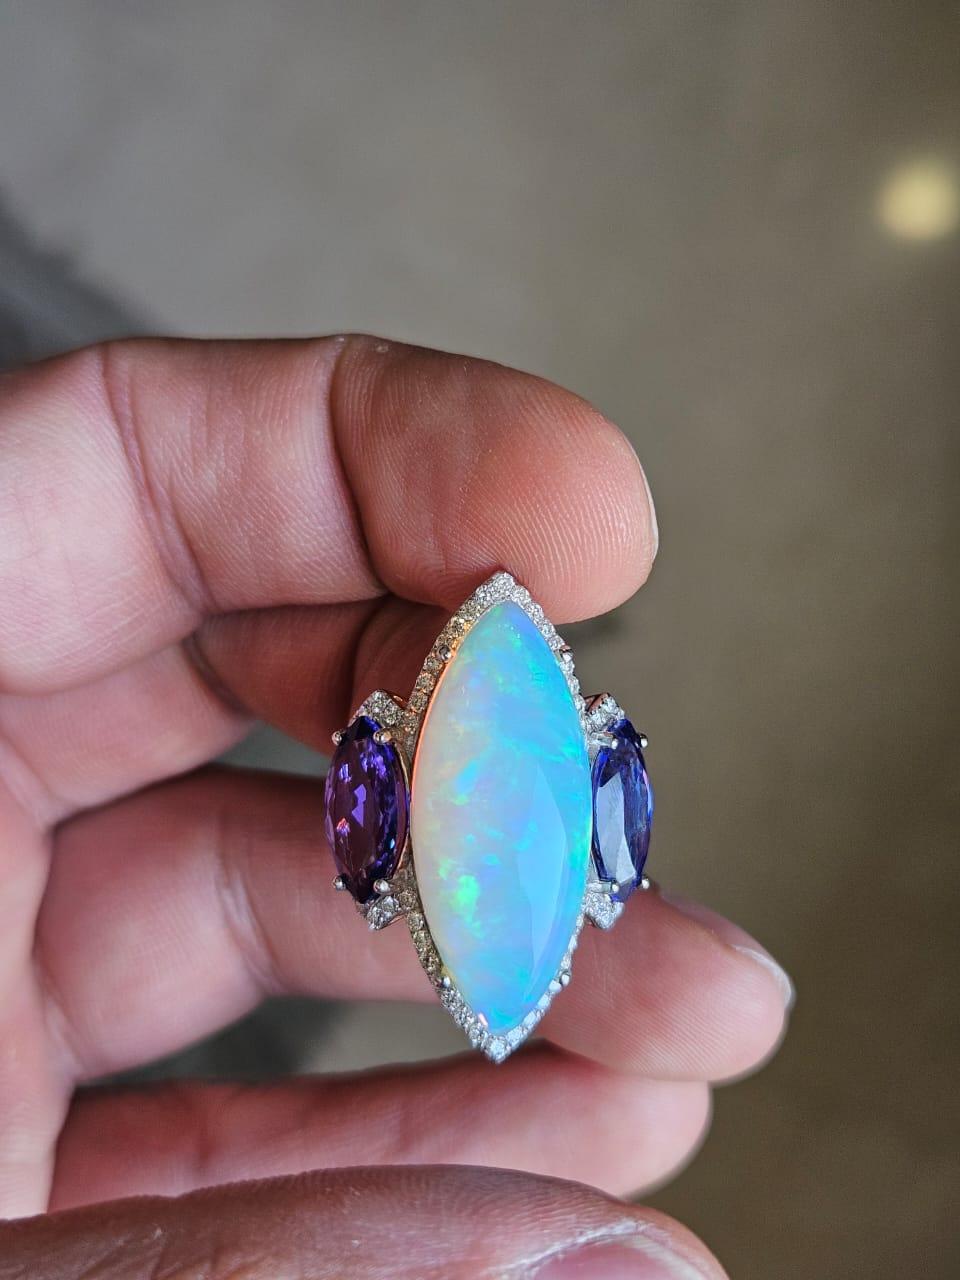 A very gorgeous and beautiful, modern style, Opal & Tanzanite Cocktail Ring set in 18K White Gold & Diamonds. The weight of the White Opal is 10.07 carats. The marquise shaped Opal is of Ethiopian Opal. The weight of the Marquise shaped Tanzanites